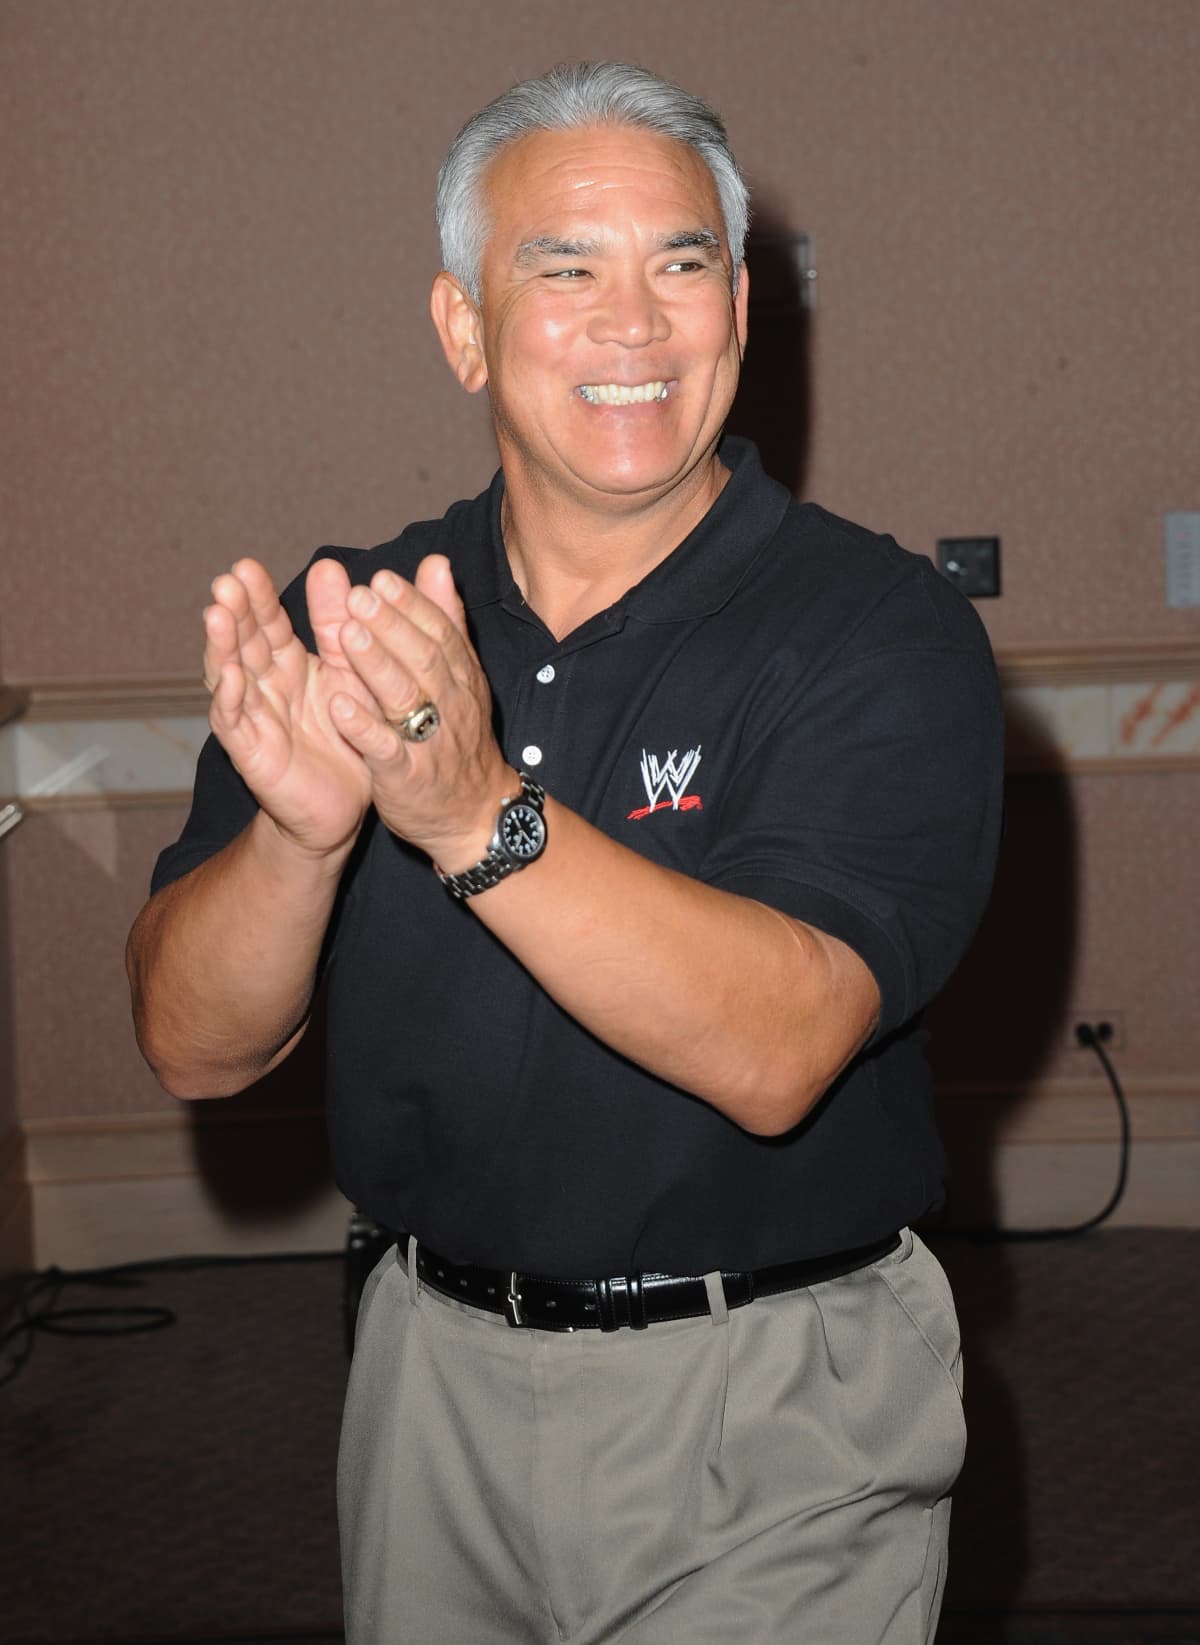 PHILADELPHIA, PA - JUNE 01:  WWE Ricky "The Dragon" Steamboat attends Philadelphia Comic Con 2013 - Day 3 at the Pennsylvania Convention Center on June 1, 2013 in Philadelphia, Pennsylvania.  (Photo by Gilbert Carrasquillo/Getty Images)